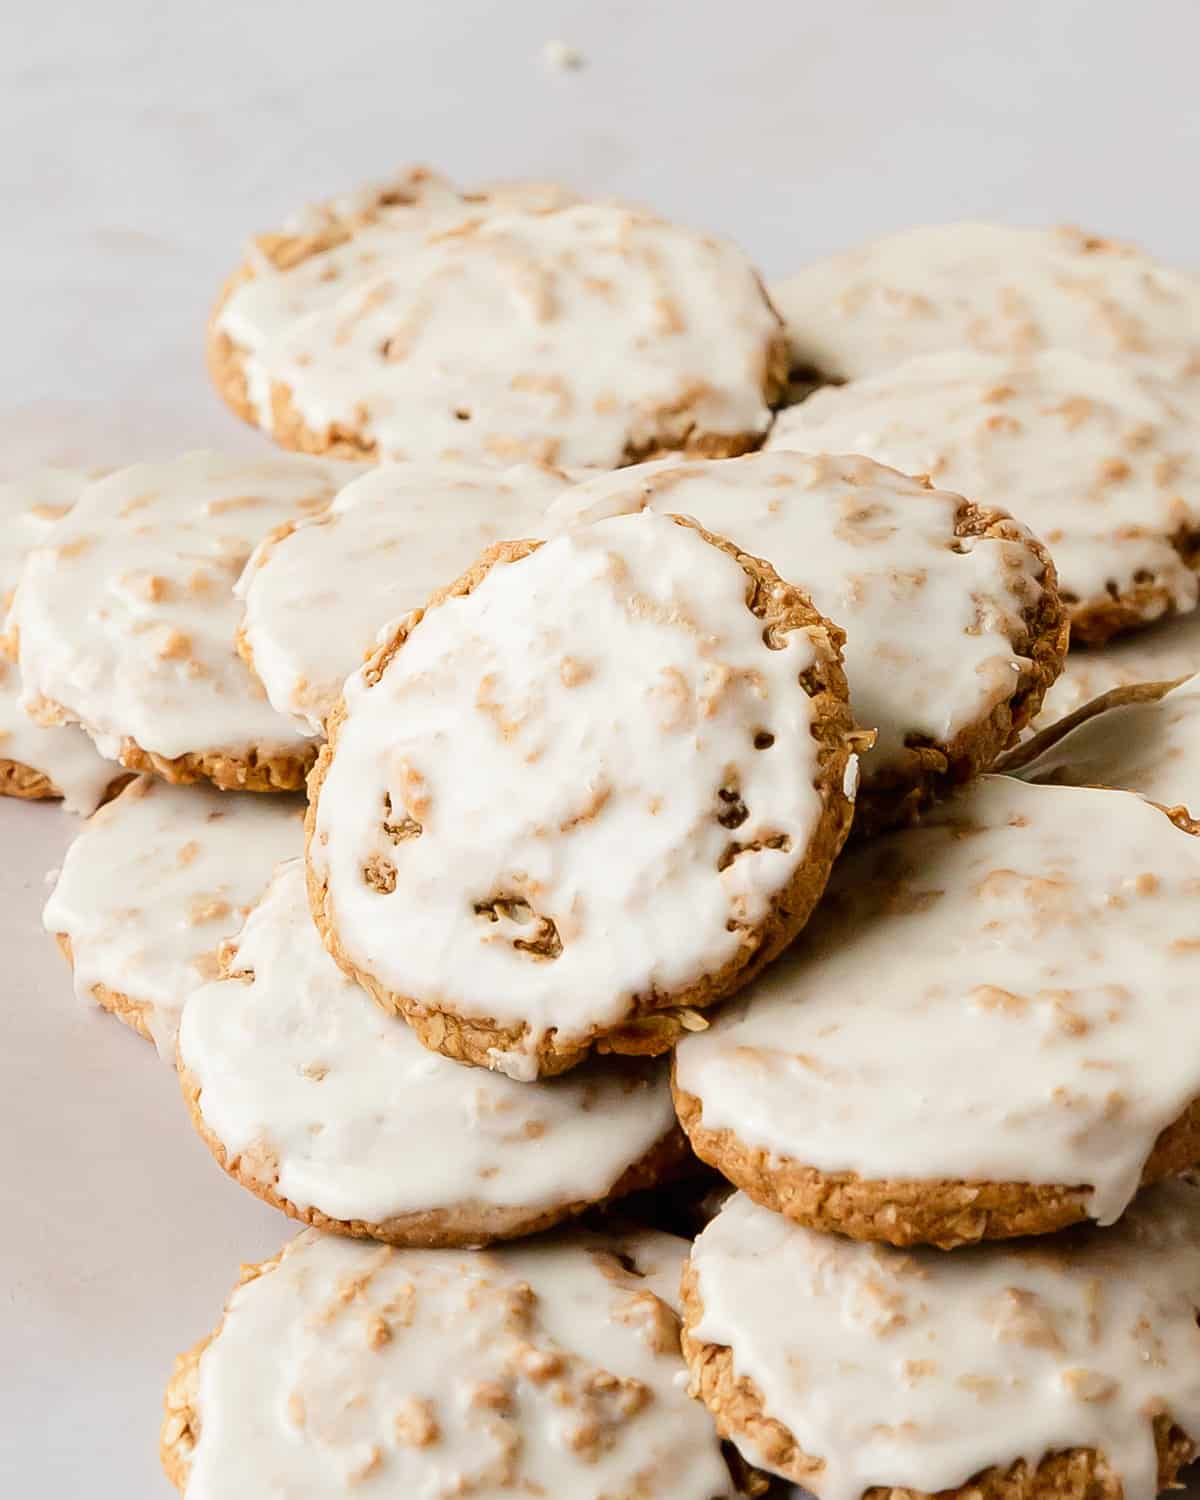 Iced oatmeal cookies are soft and chewy cookies filled with cozy spices, topped with a vanilla icing.  What I love most about these frosted oatmeal cookies are that they require no chill chilling time and are super easy to make. These old-fashioned oatmeal cookies are the perfect cozy cookie everyone will love!